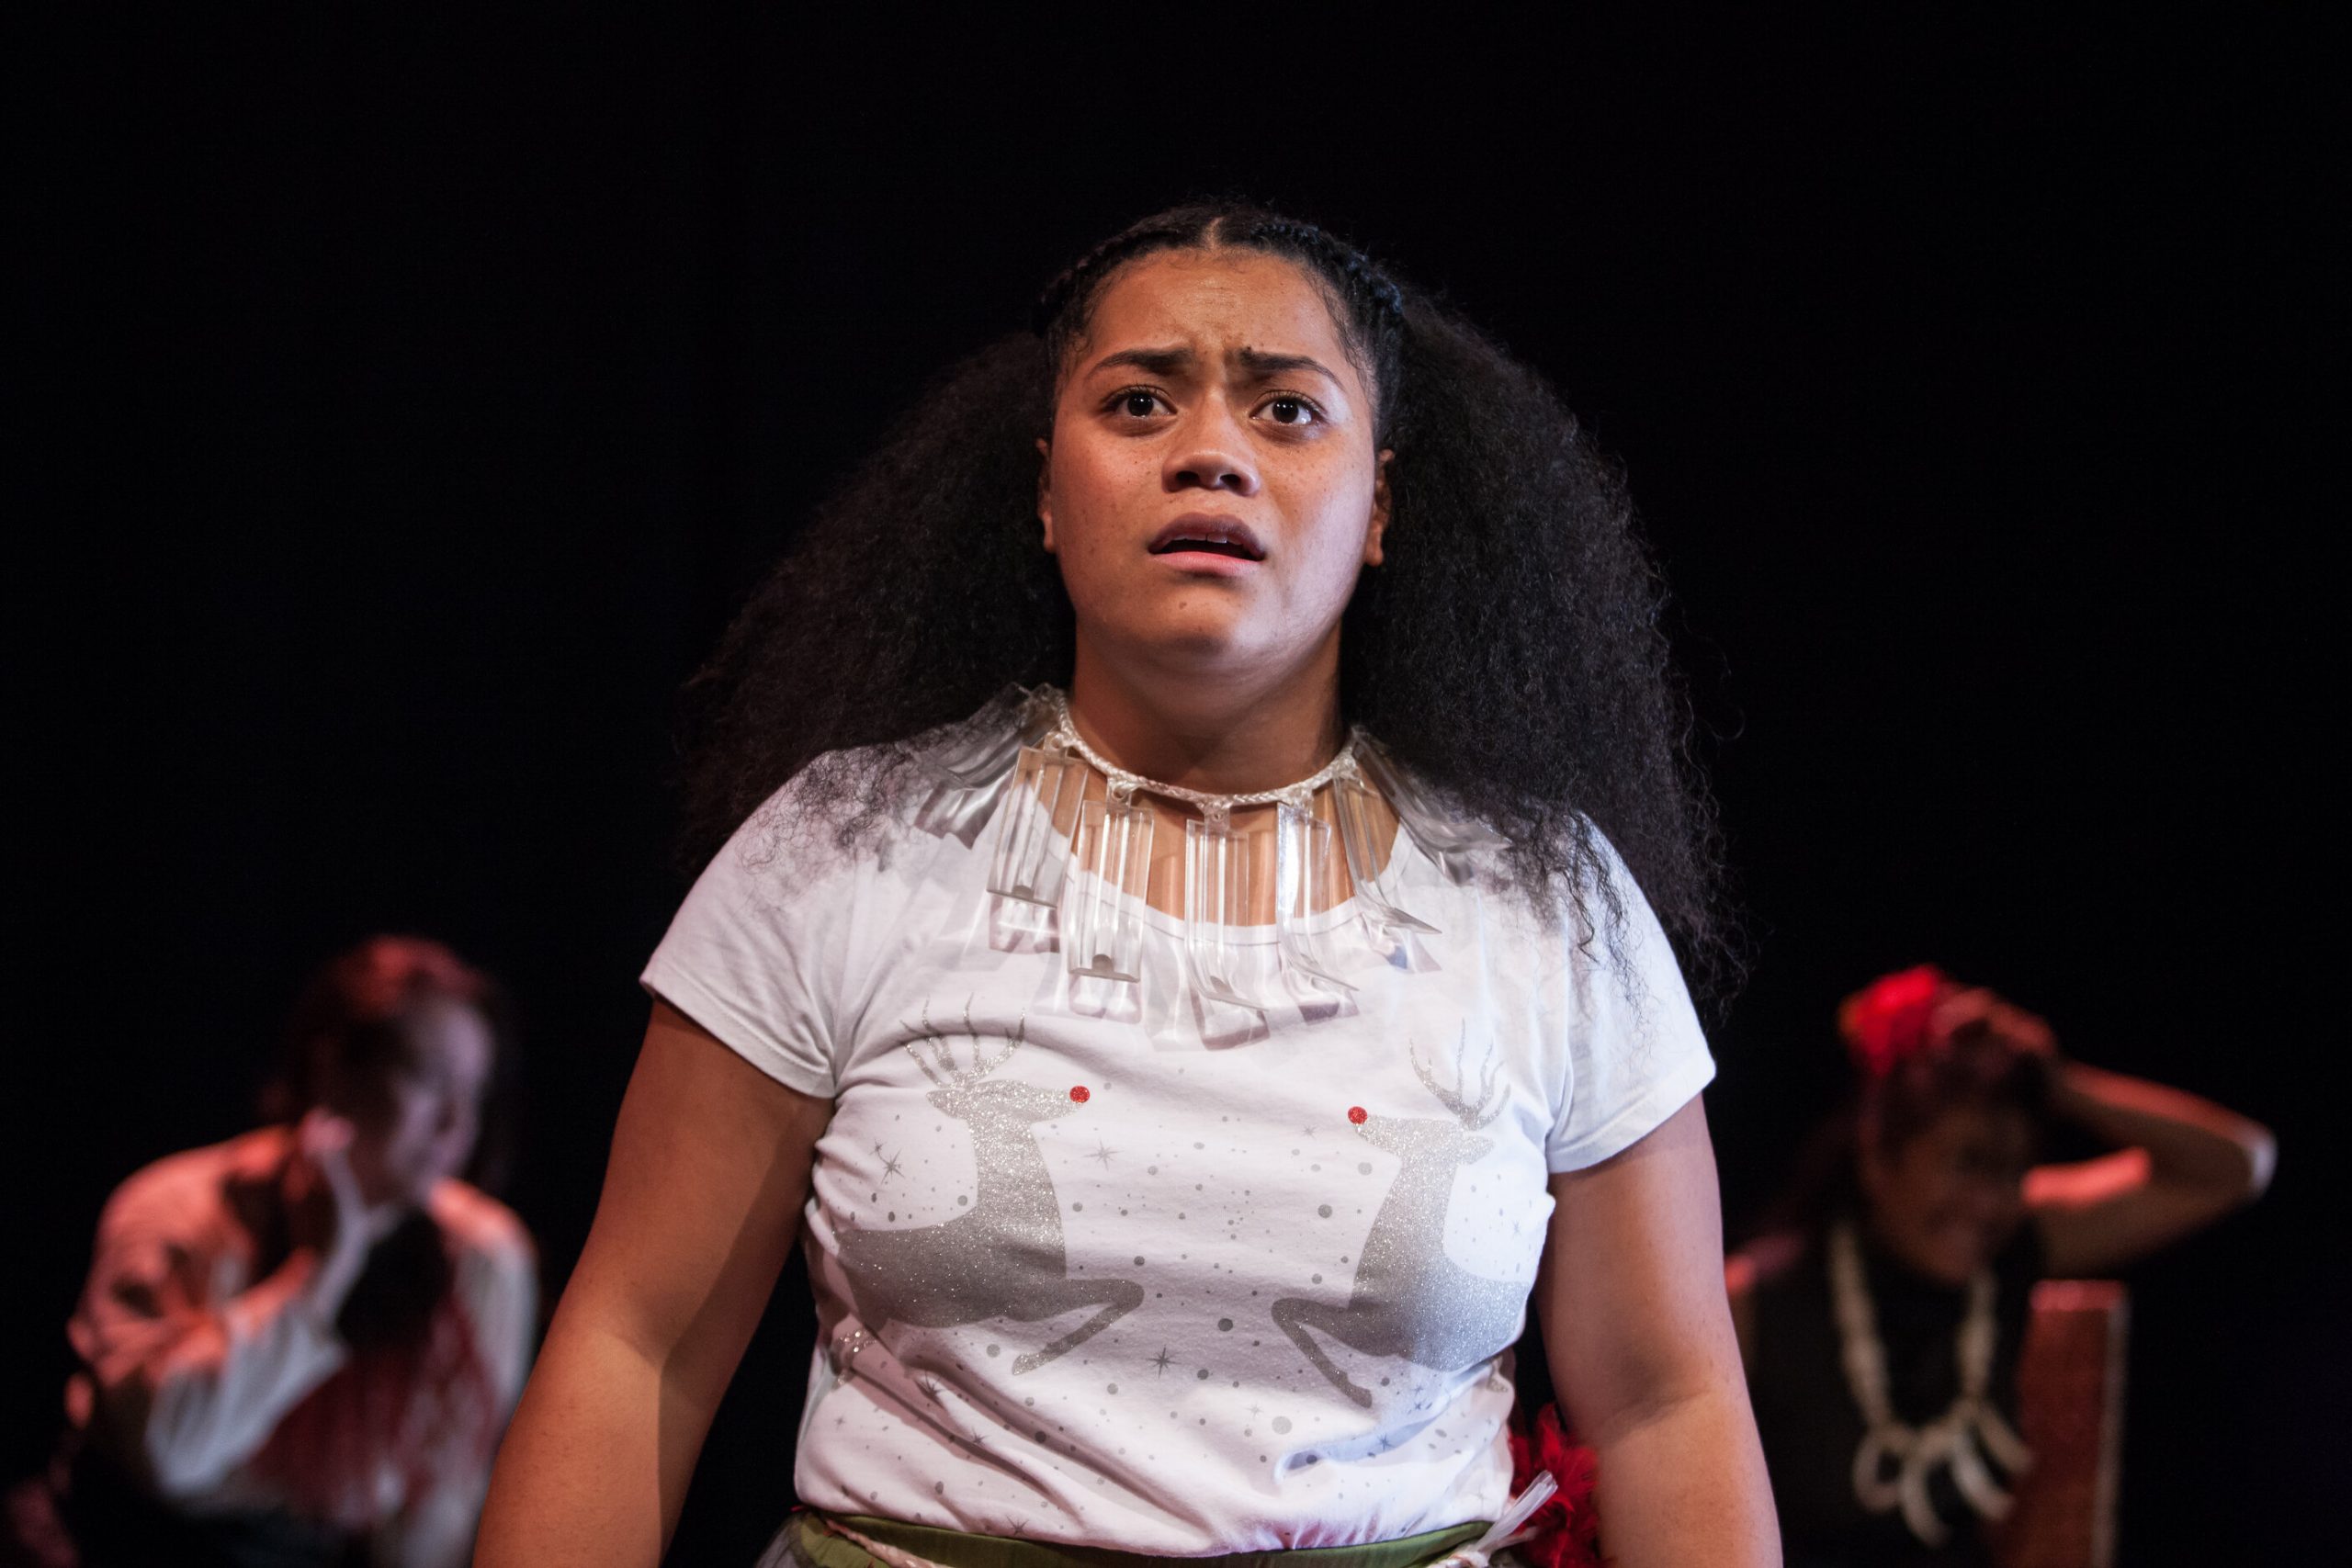 REVIEW: Real Fake White Dirt (Mouth to Mouth) - Theatre Scenes: Aotearoa  New Zealand Theatre